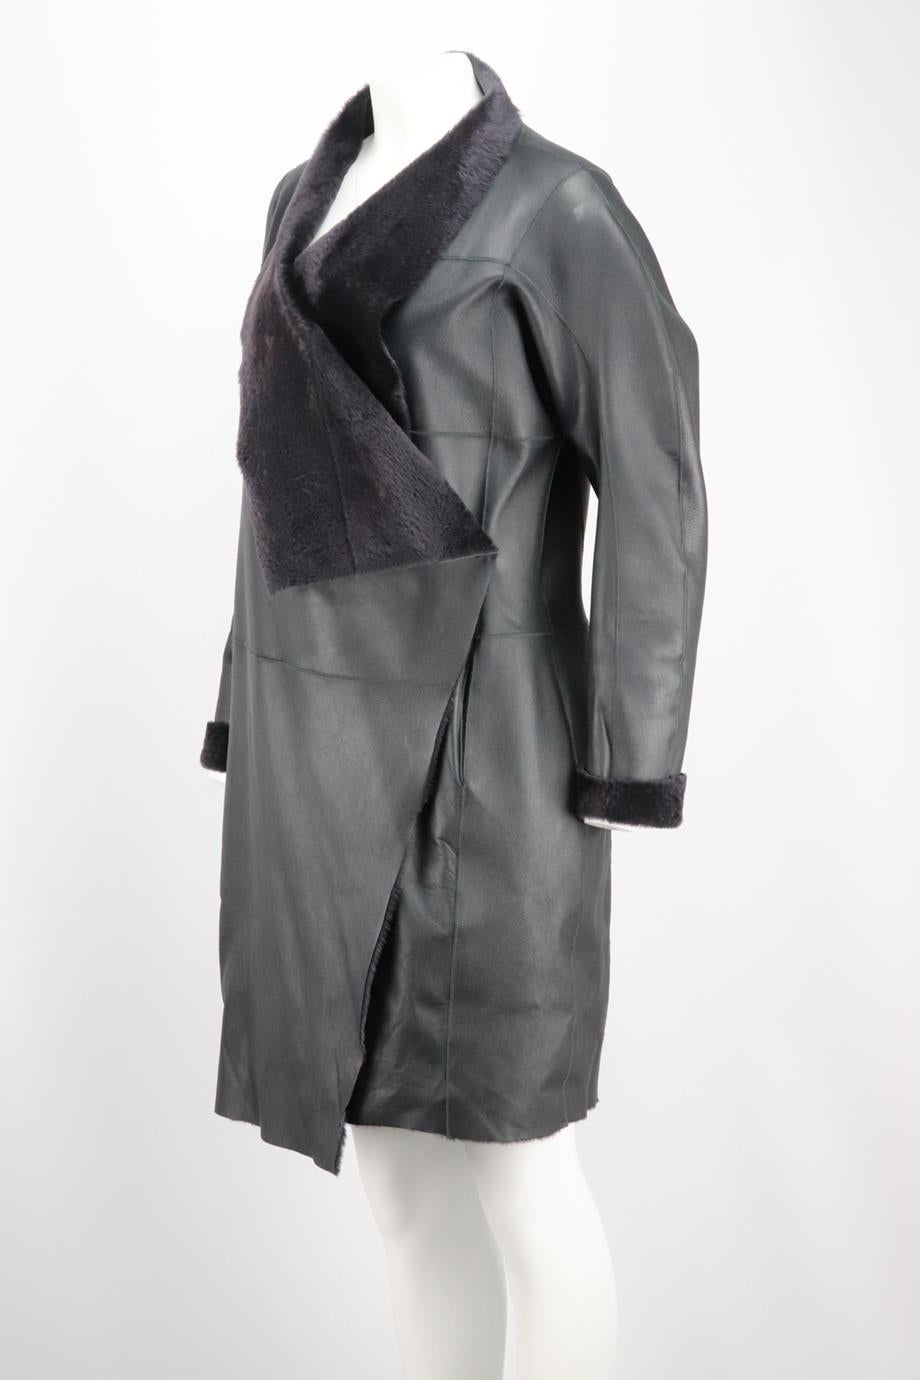 Amanda Wakeley Shearling Lined Leather Coat. Asymmetric hem and lapels in a wrap effect silhouette. Long sleeve, v-neck. Large ;apels. Navy. Snap button fastening at front. 100% Sheepskin; trim: 100% silk. Size: Large (UK 12, US 8, FR 40, IT 44).